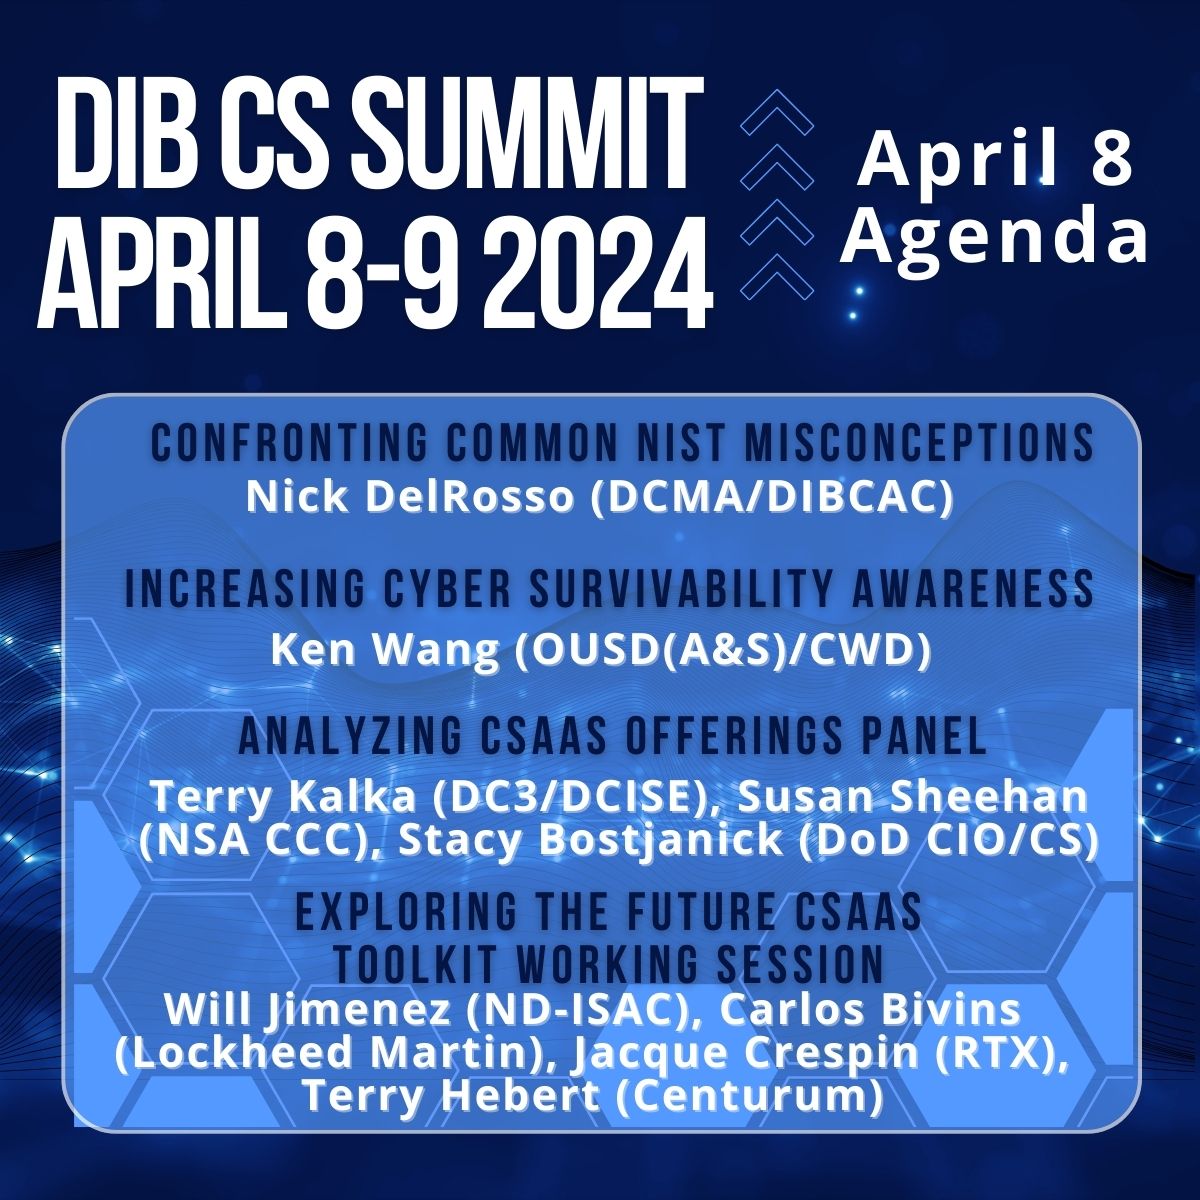 The DIB CS Summit is near! On April 8th, members of the DIB CS Program will hear from representatives from @DCMA @OUSD(A&amp;S) @DC3 @NSACCC @DODCIO @NDISAC @lockheedmartin @RTX and @centurum. https://t.co/tz5FR35cUx